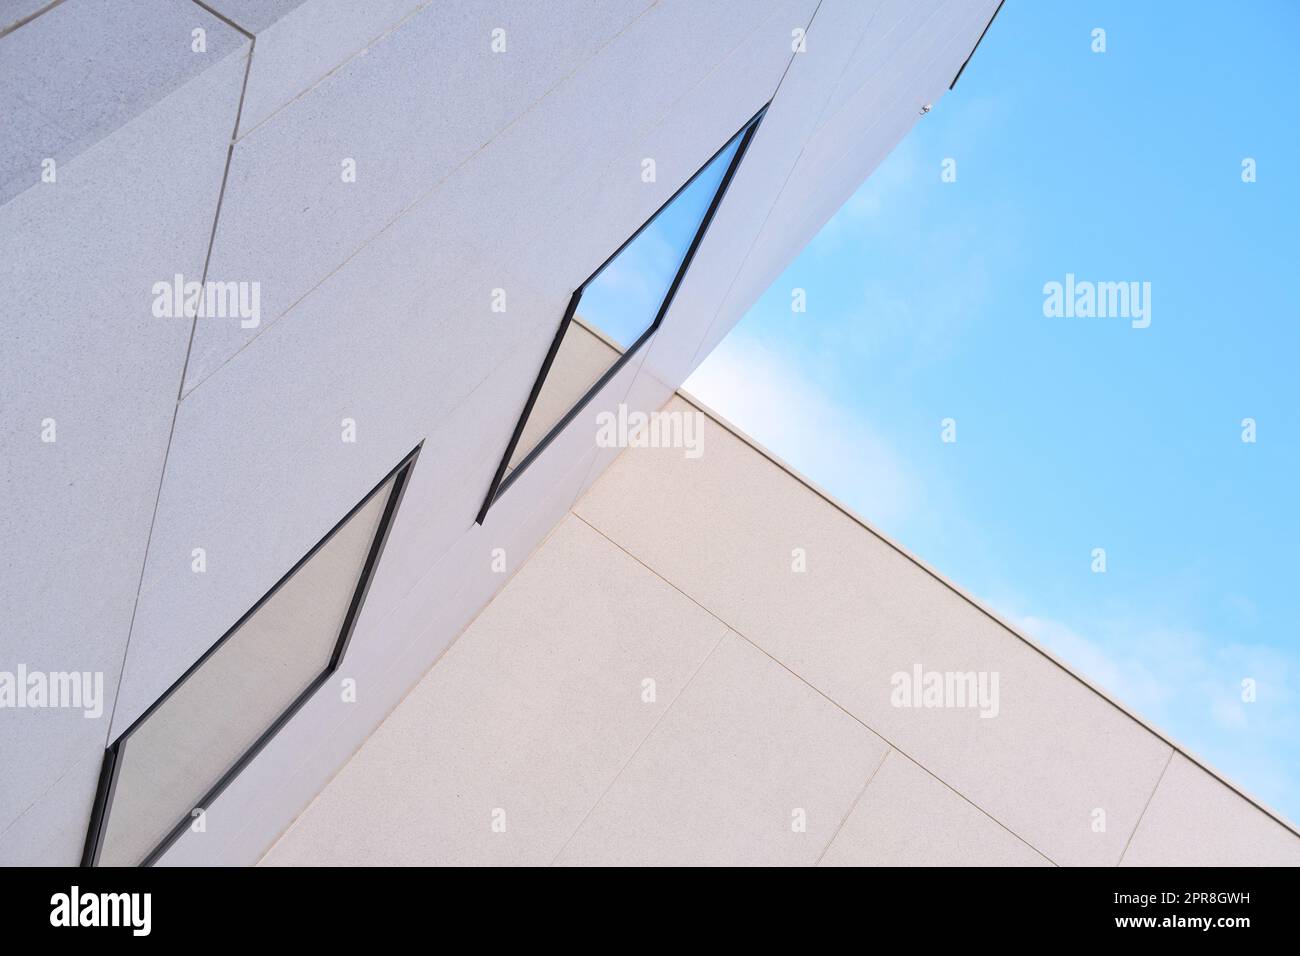 Angled view of tall building exterior on a sunny day. Concept of modern white housing with reflective windows against a blue sky. Abstract background of architecture for copy space outside Stock Photo